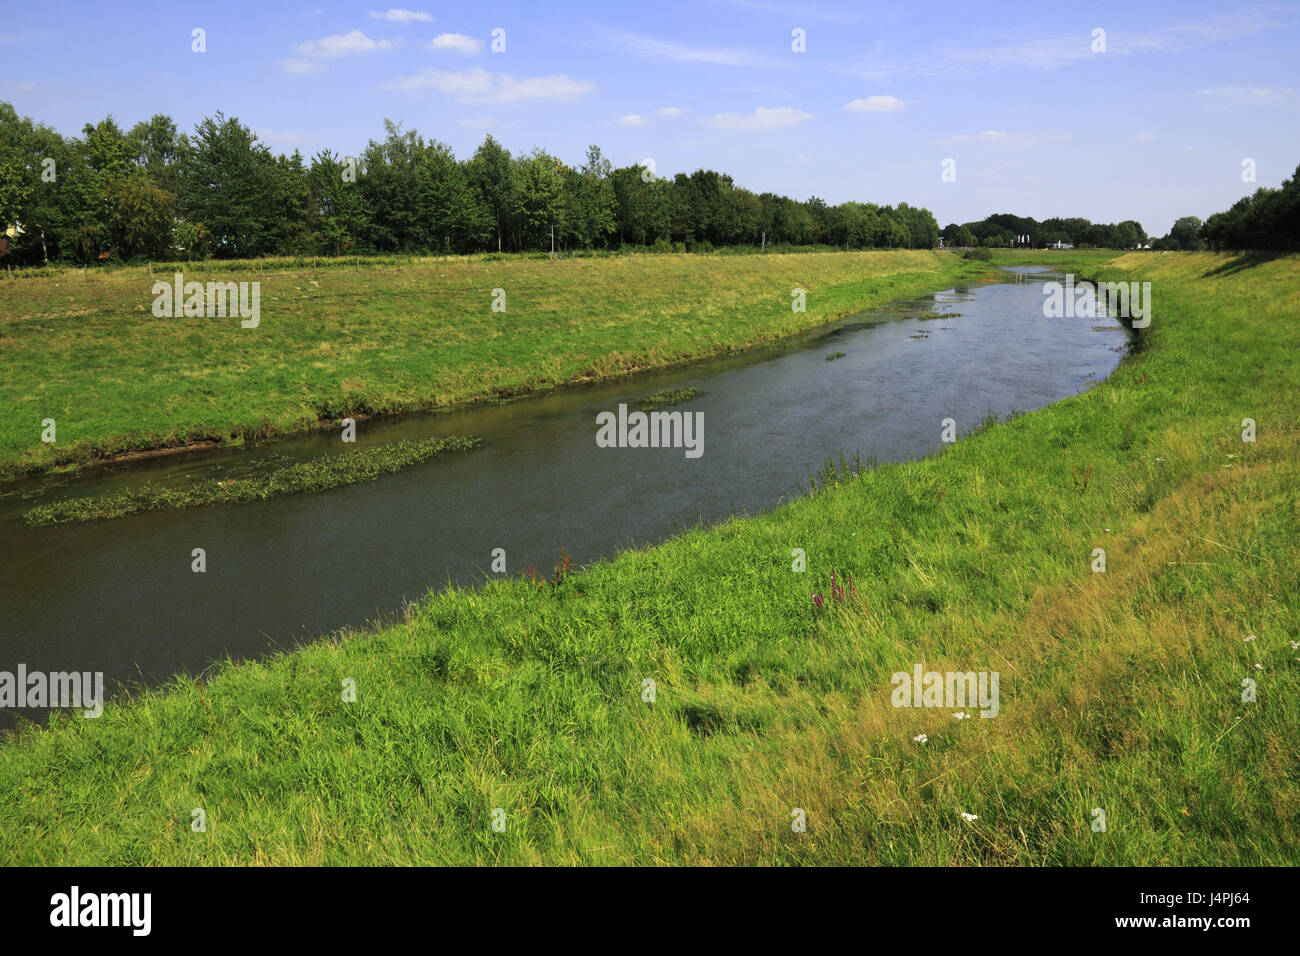 Germany, Löningen, big hare, hare's valley, Oldenburg cathedral country, Lower Saxony, hare's scenery, river scenery, panorama, Stock Photo